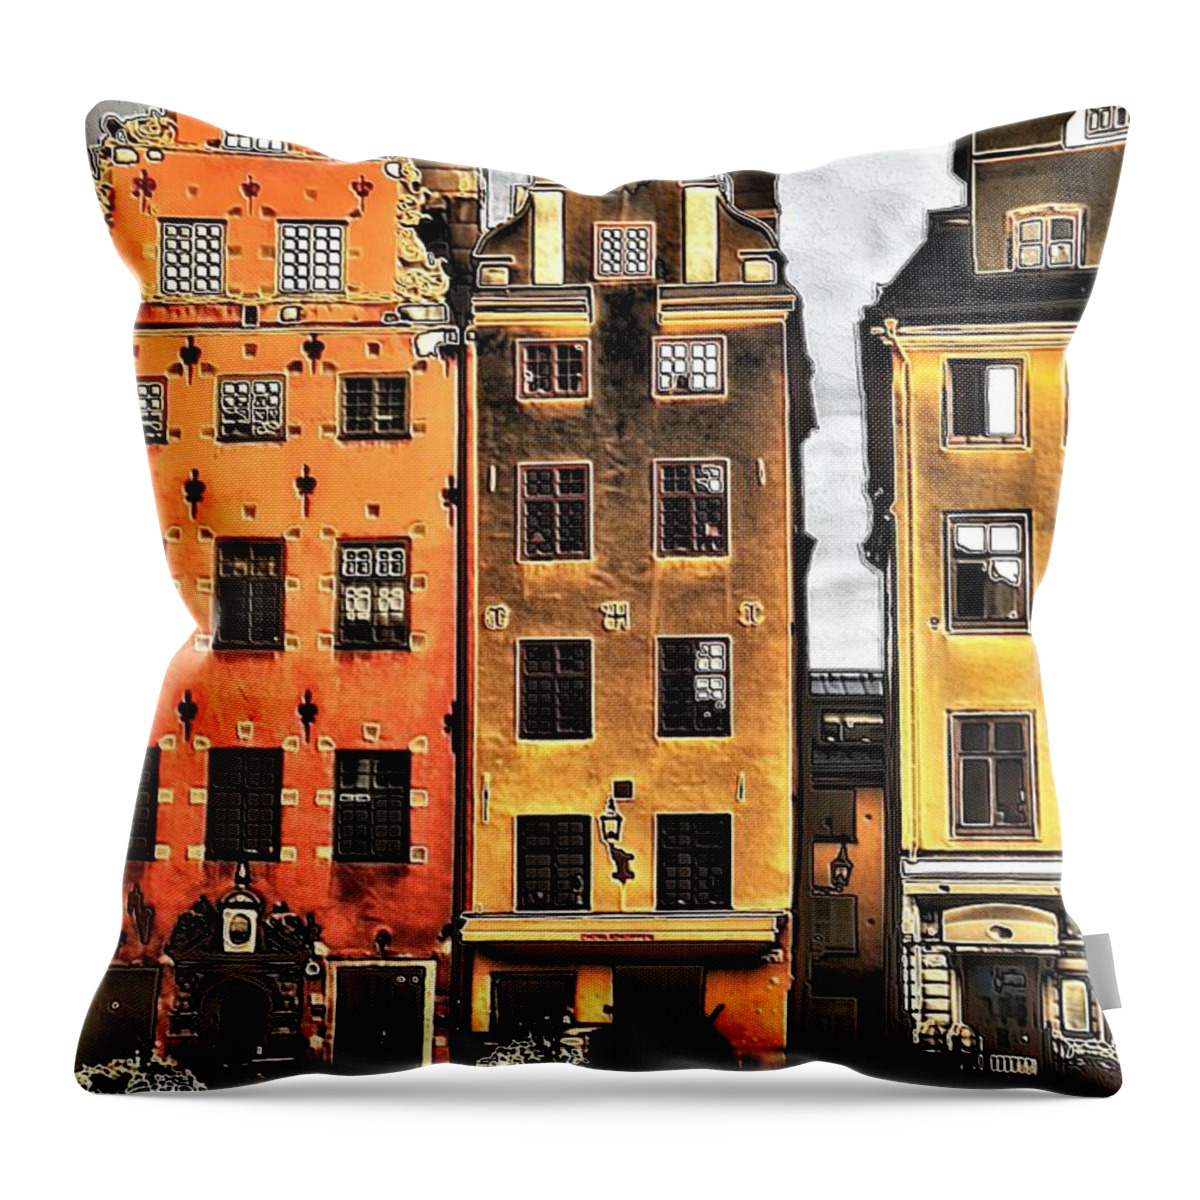 Europe Throw Pillow featuring the photograph Lined Up by Jenny Hudson